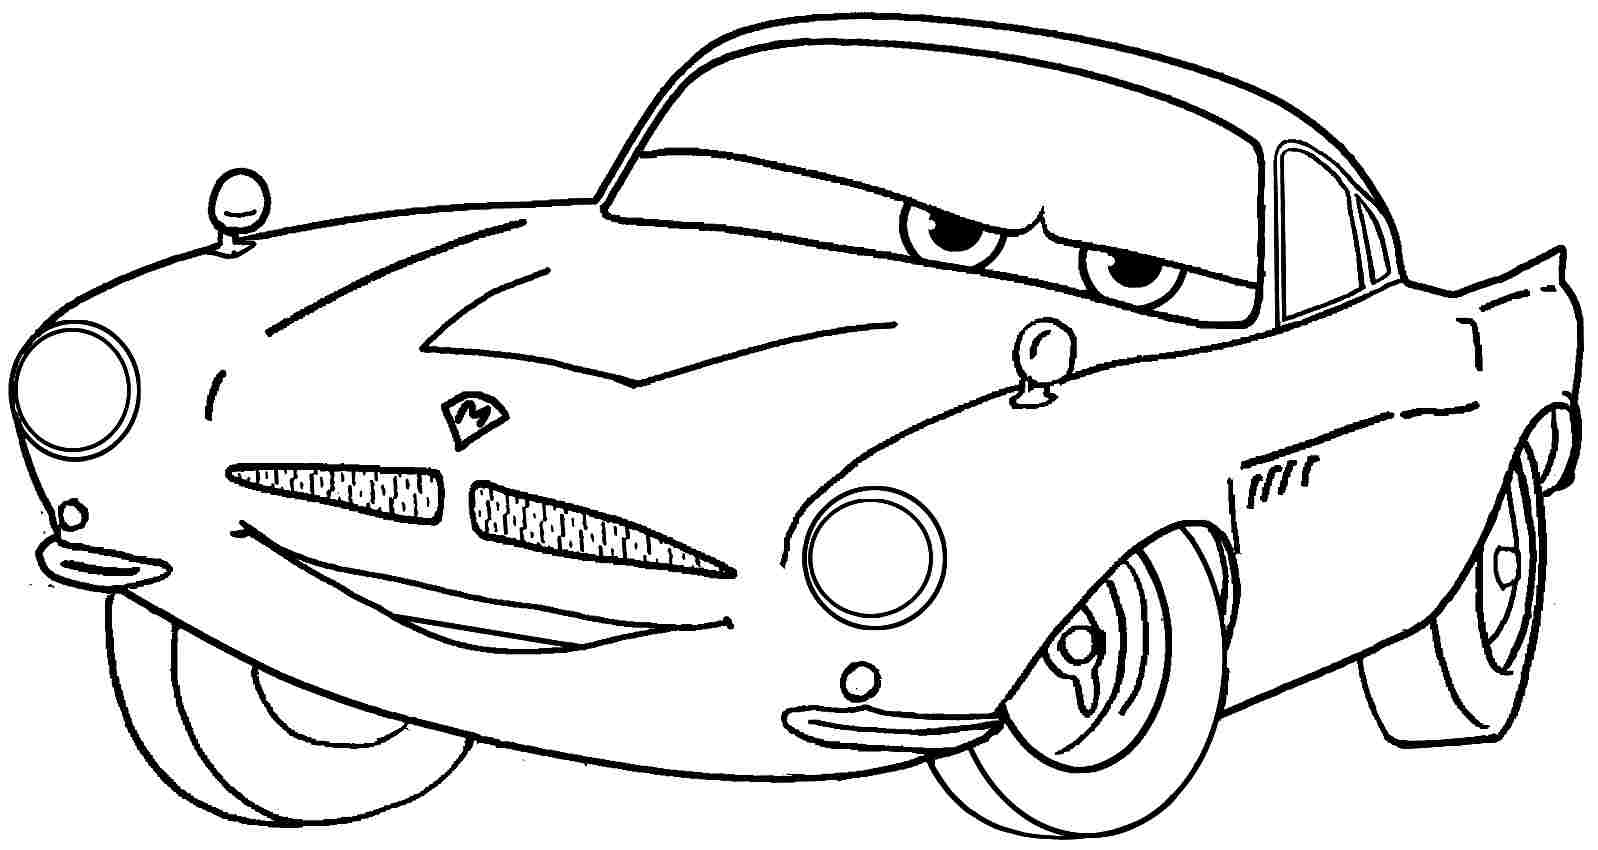 7-best-images-of-free-printable-cars-the-movie-cars-movie-printable-coloring-pages-cars-movie